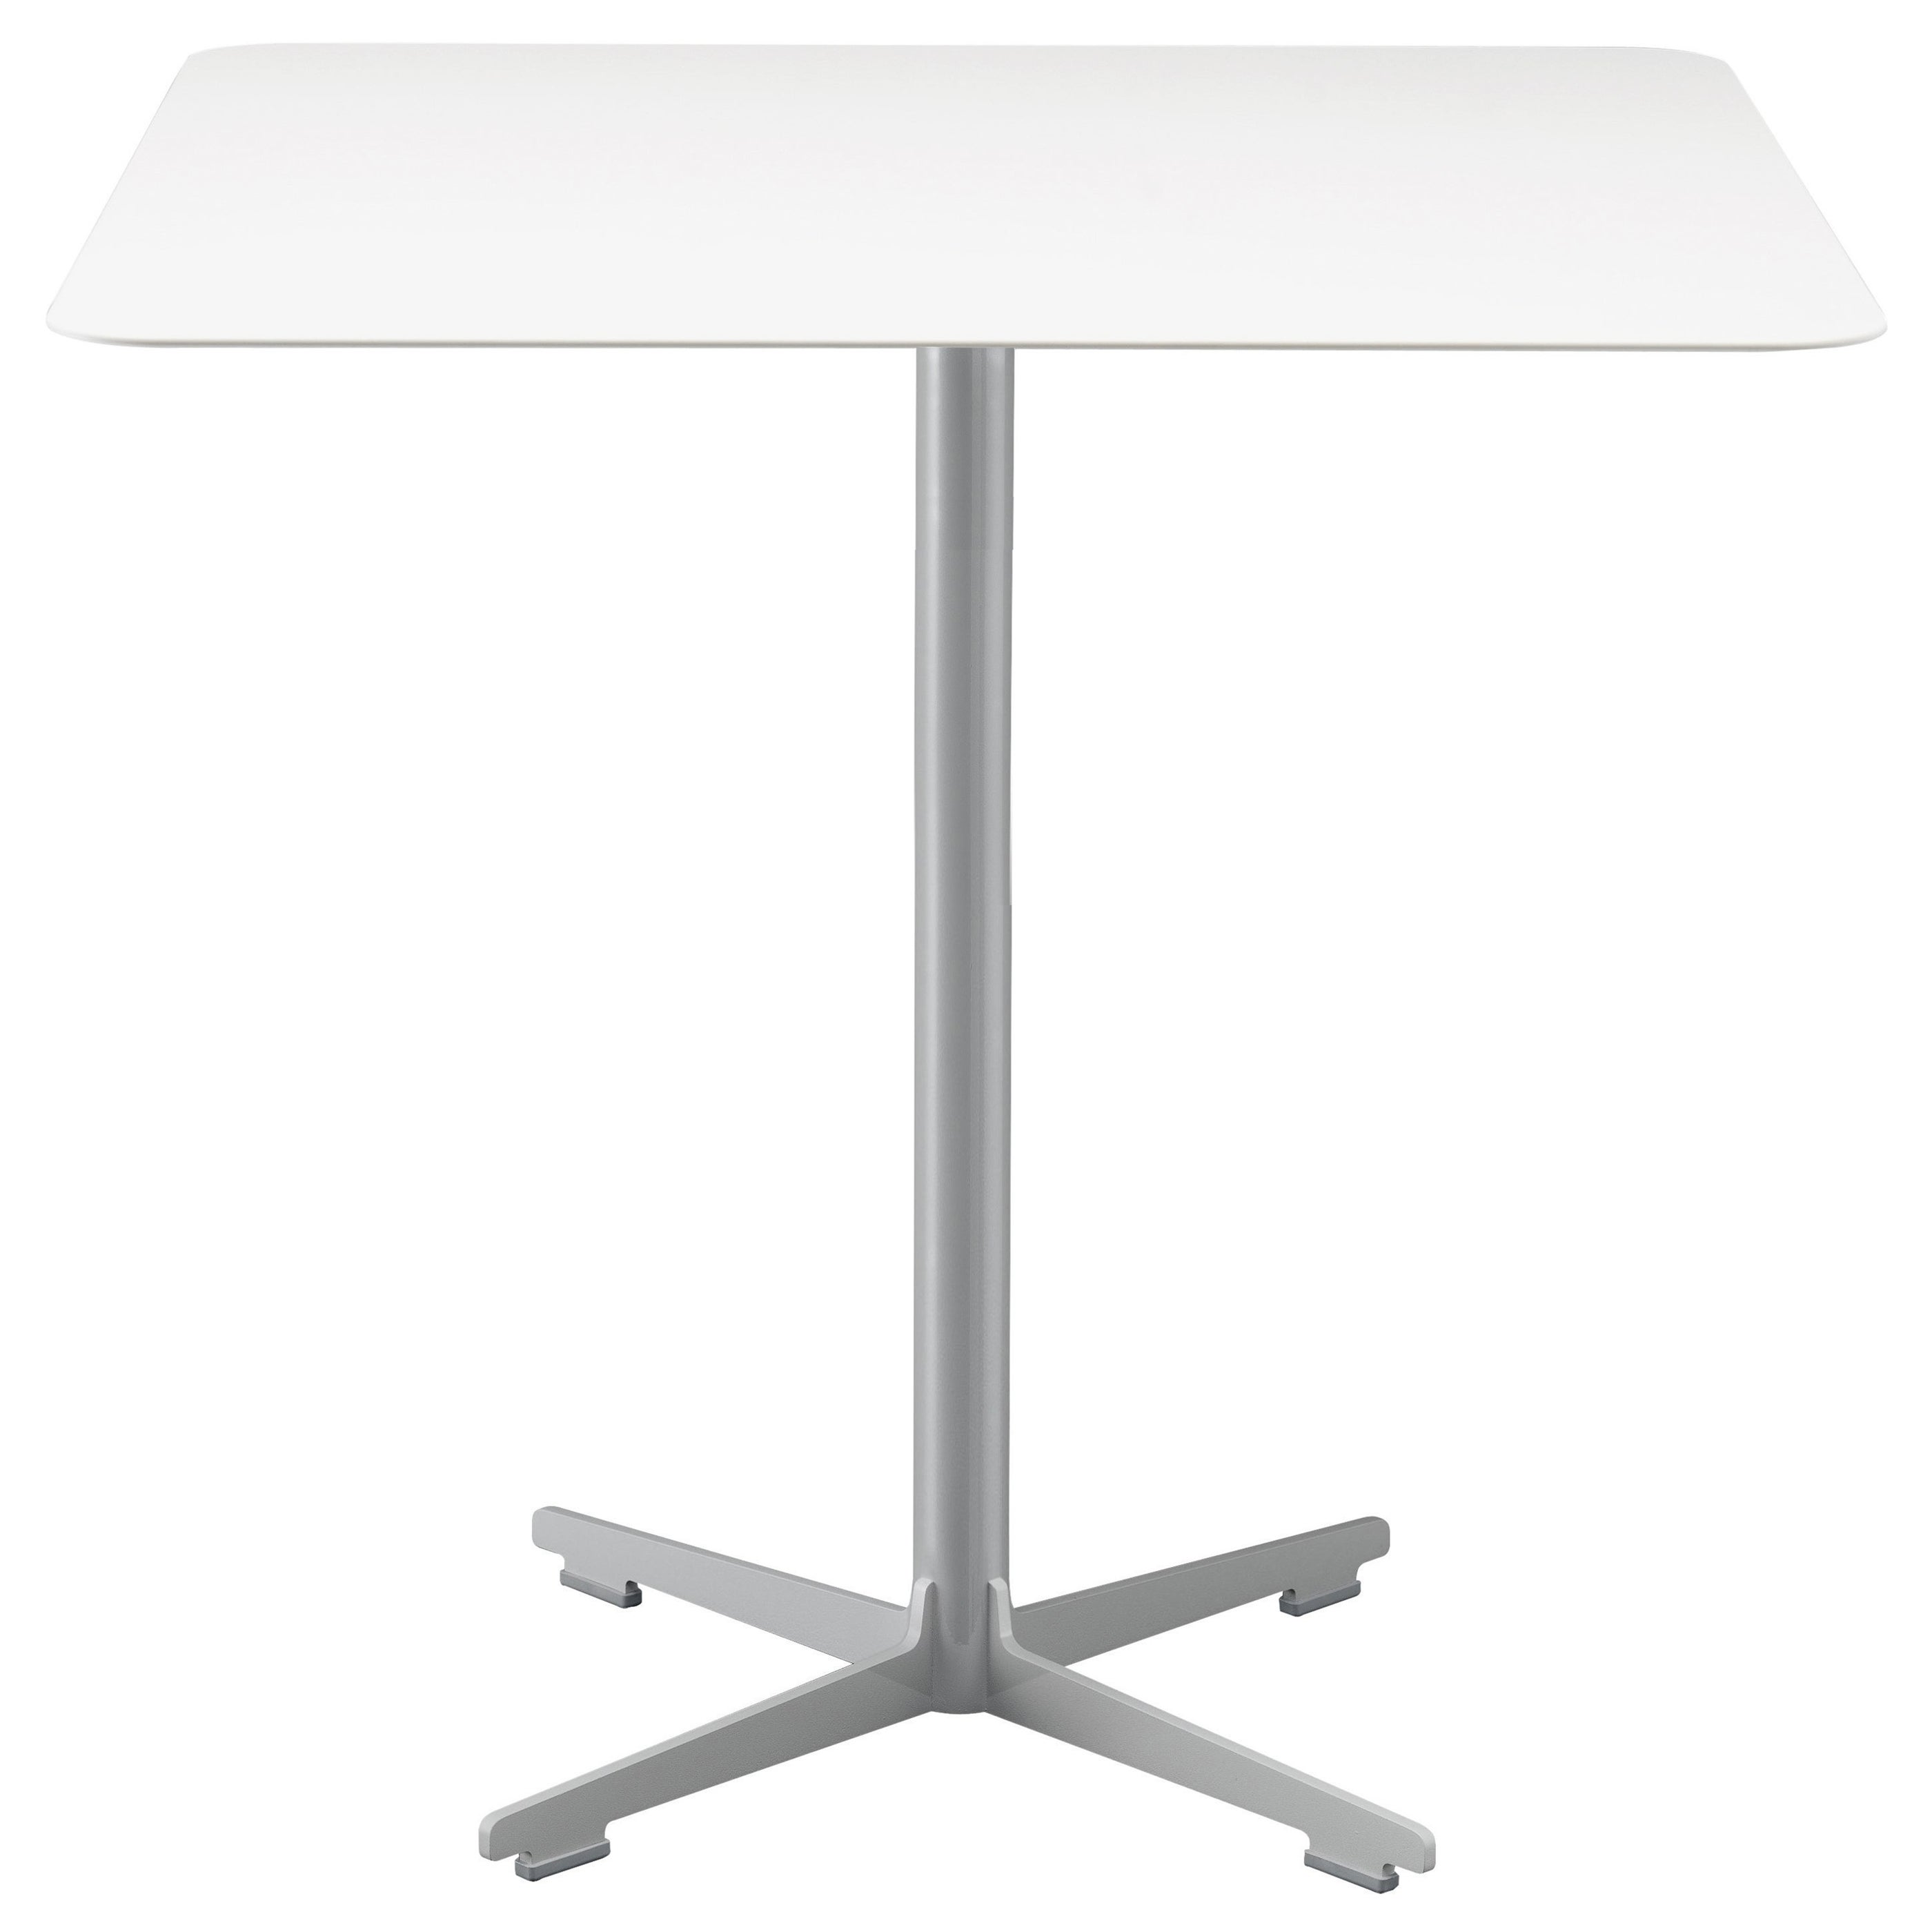 Alias Large 577 Cross Table with Light Grey Top and Lacquered Steel Base